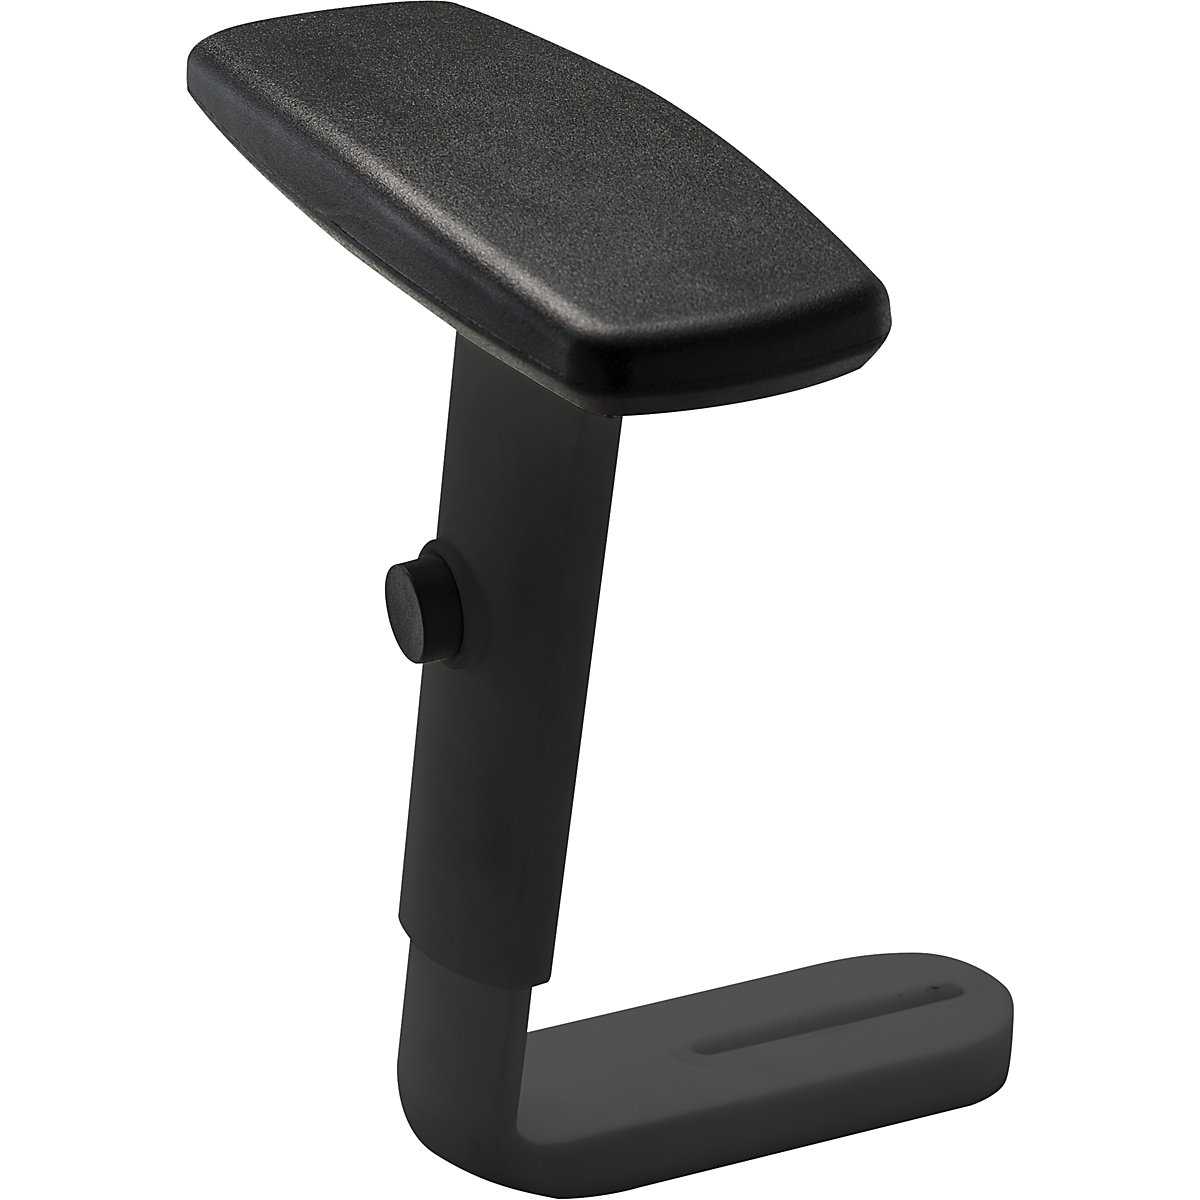 Office swivel chair arm rests – Prosedia, 1 pair, height adjustable arm rests